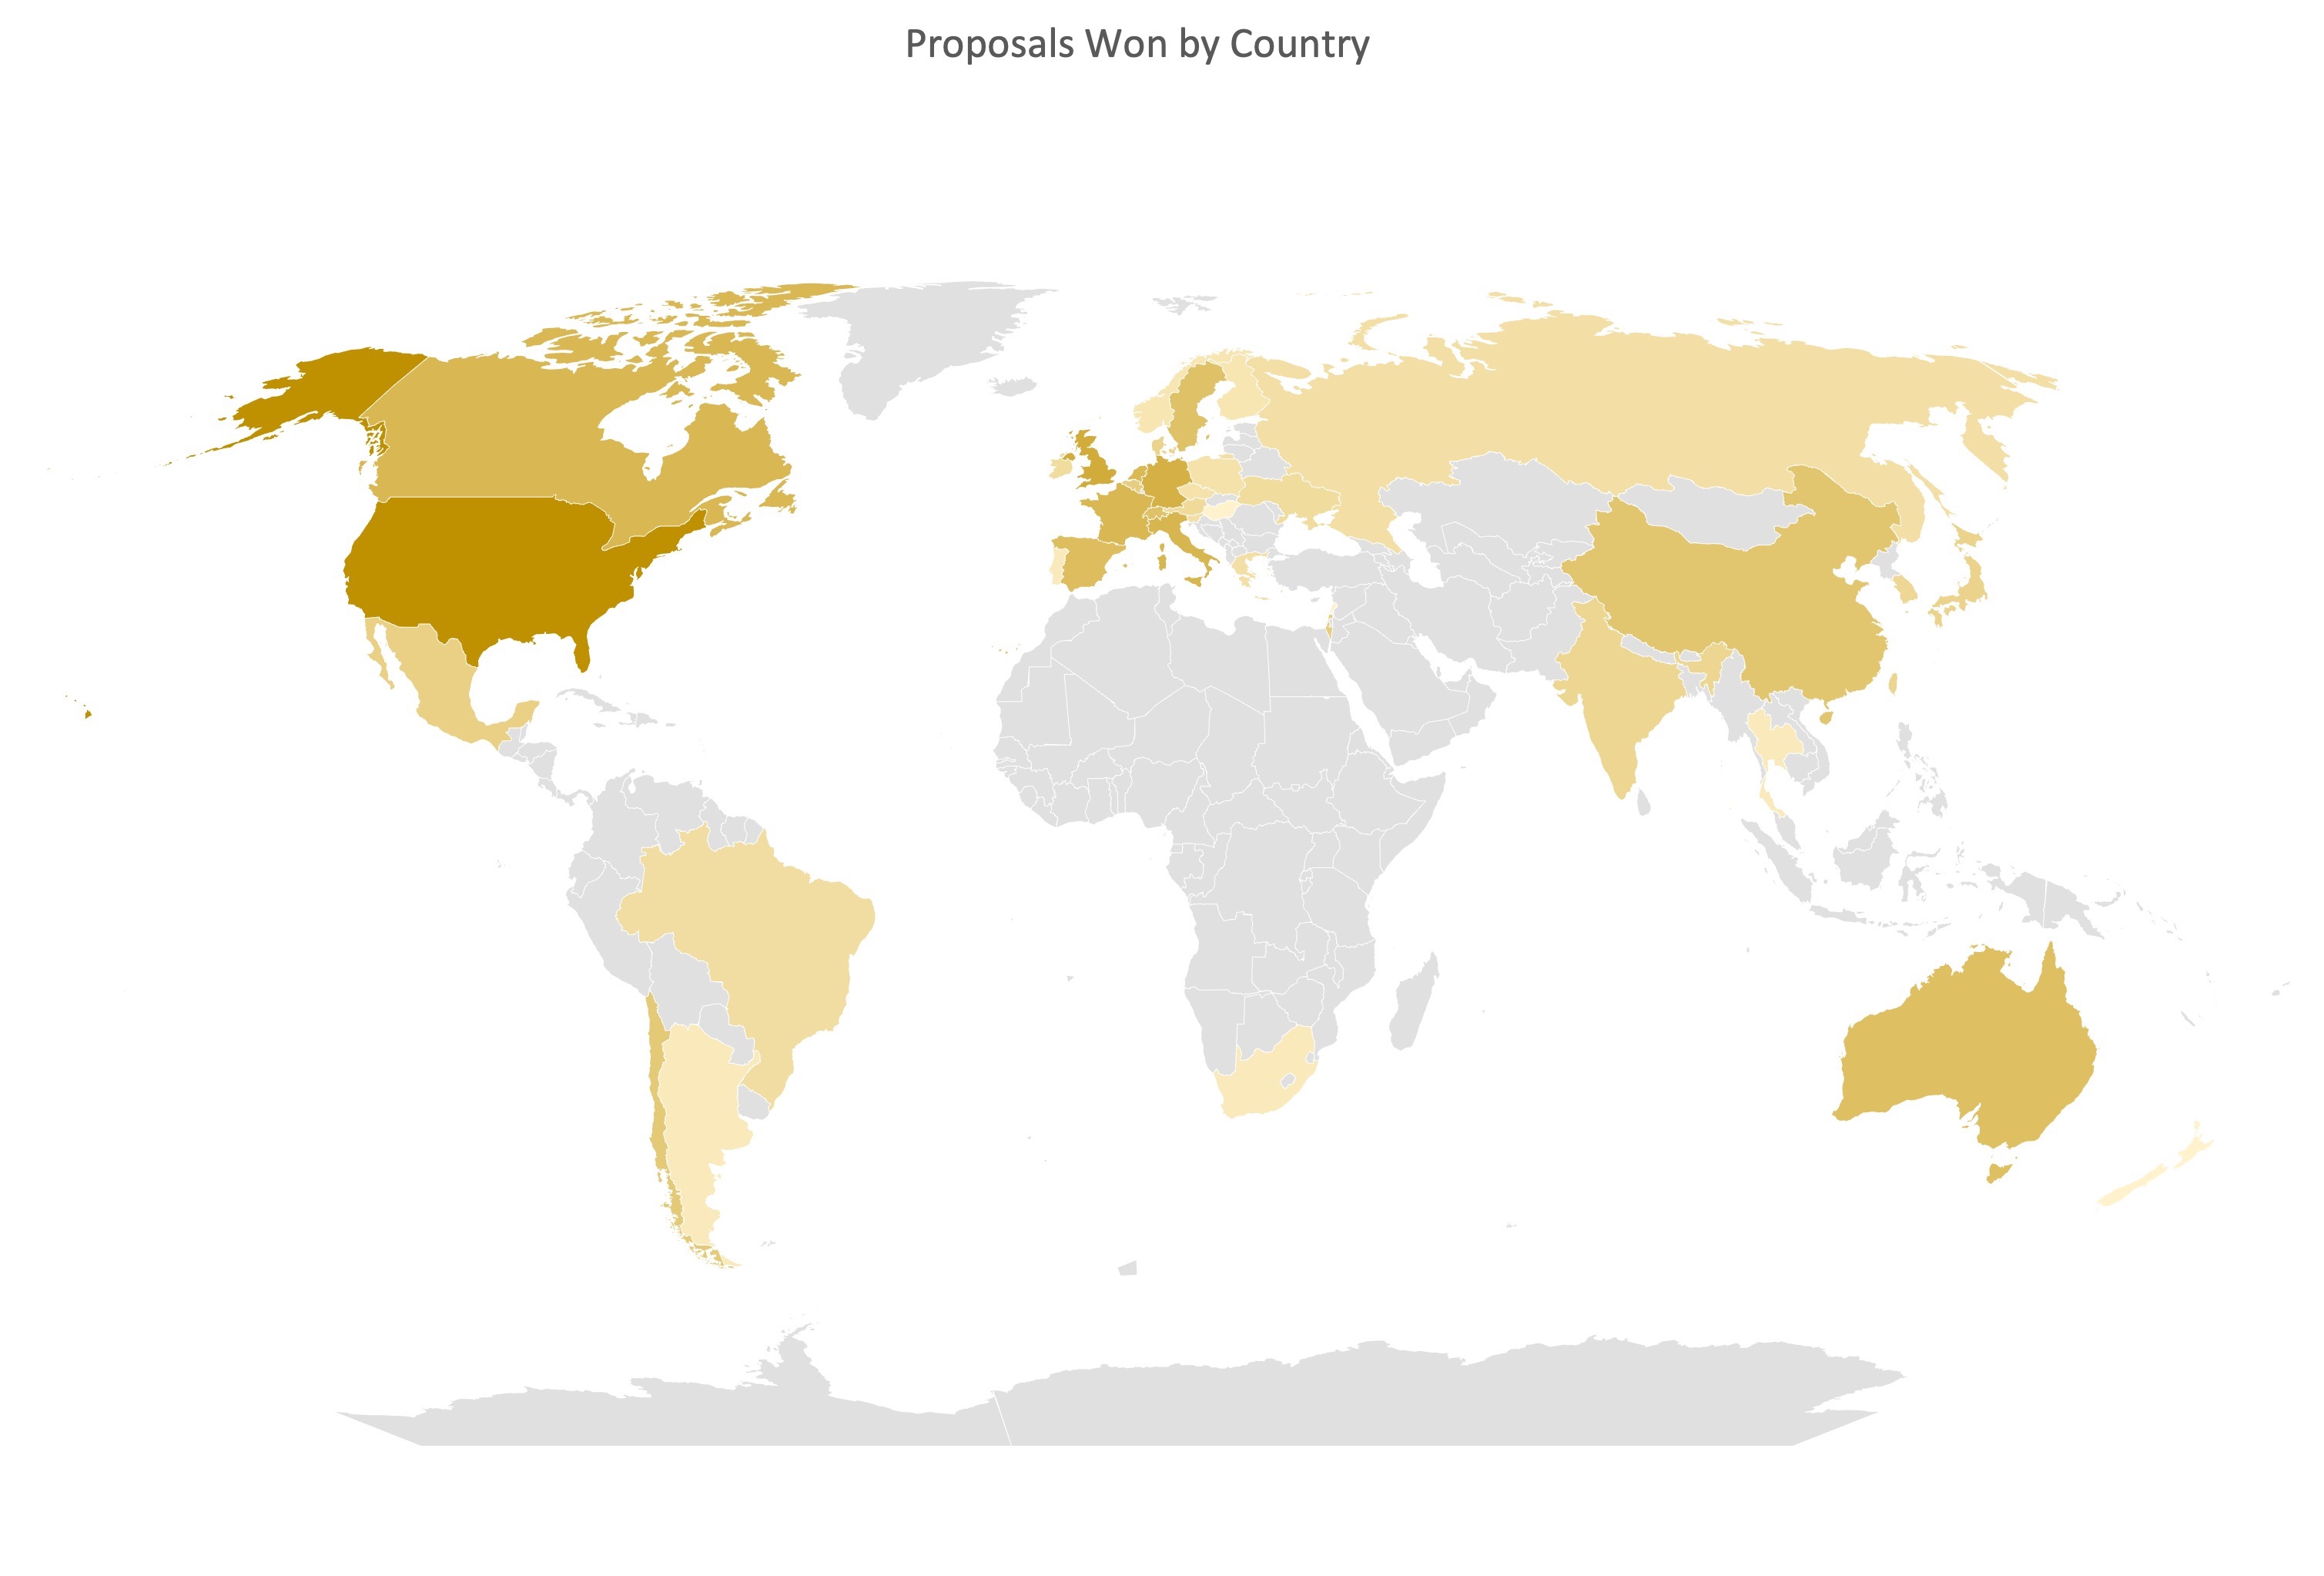 A map of the world with brighter or darker colors indicating the number of proposals won